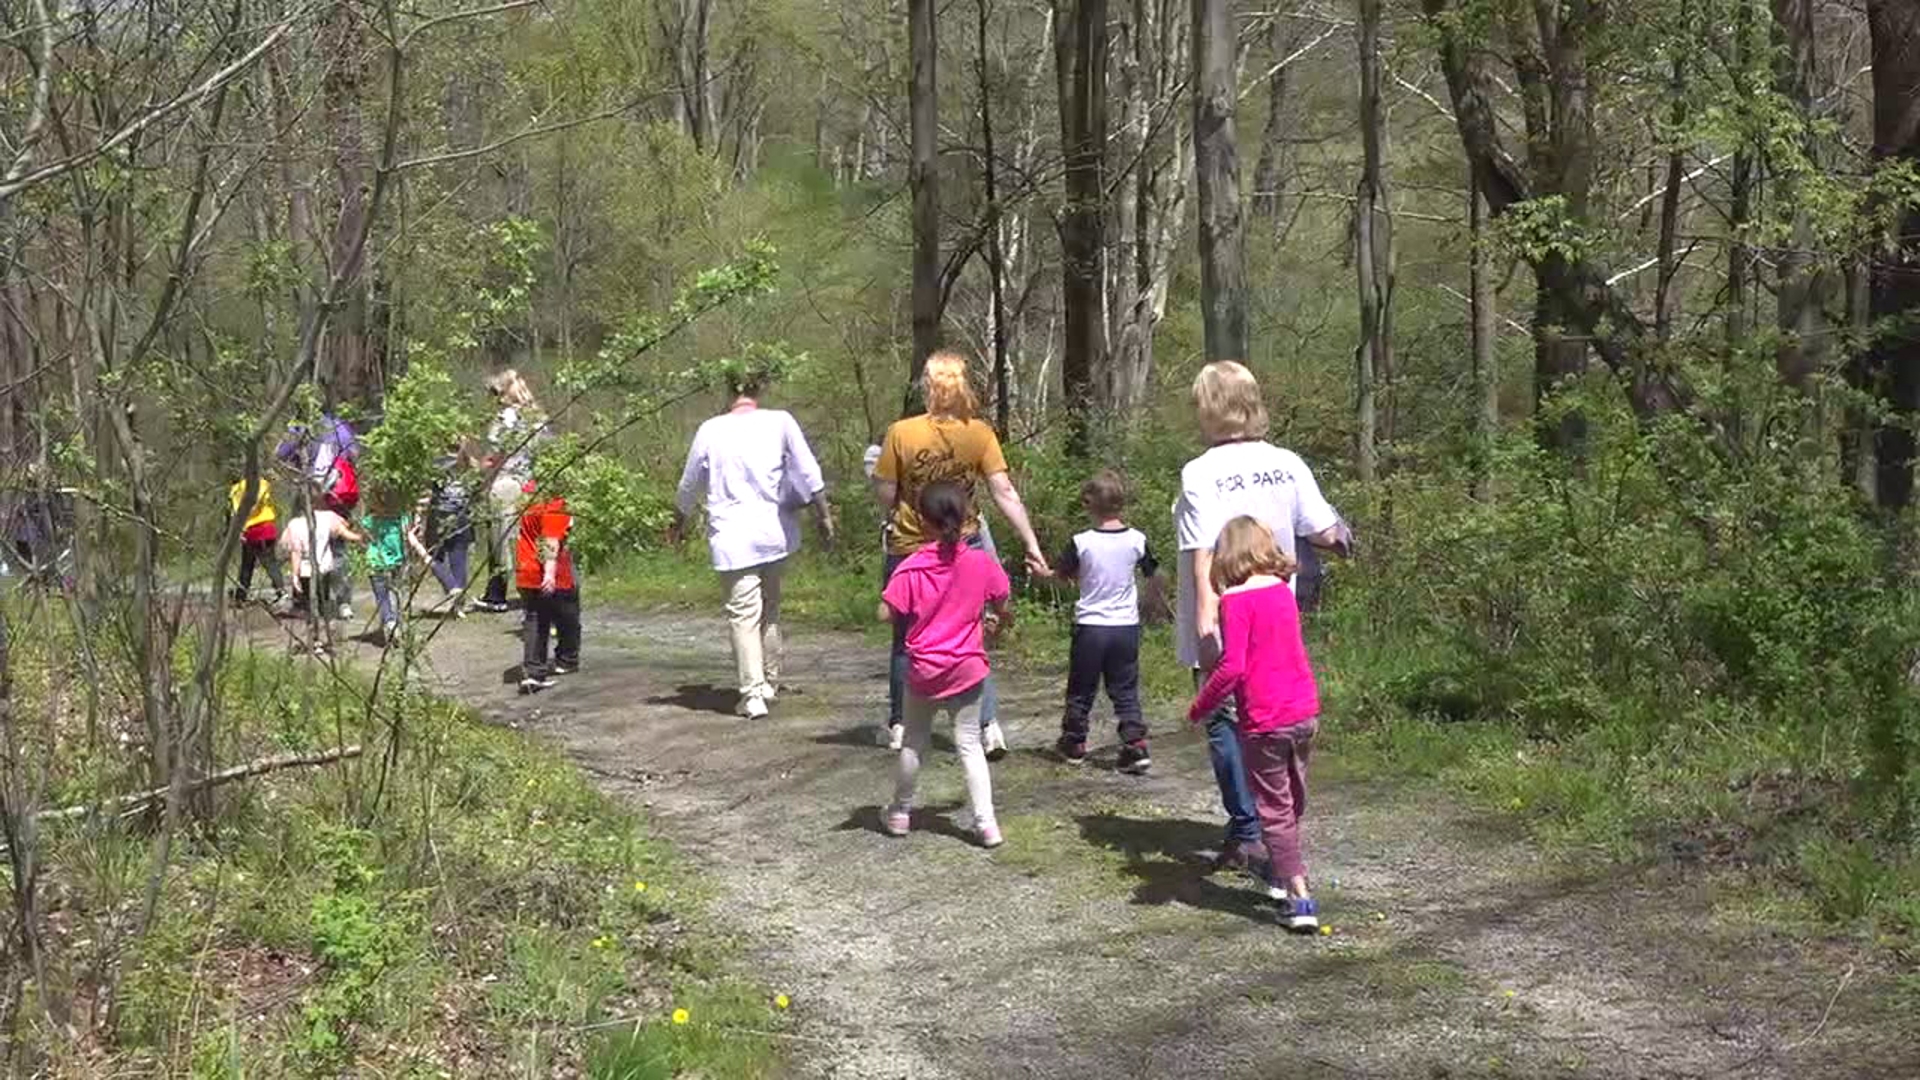 About 50 kids from Forest City Regional explored the campus that spans Lackawanna and Wyoming Counties.